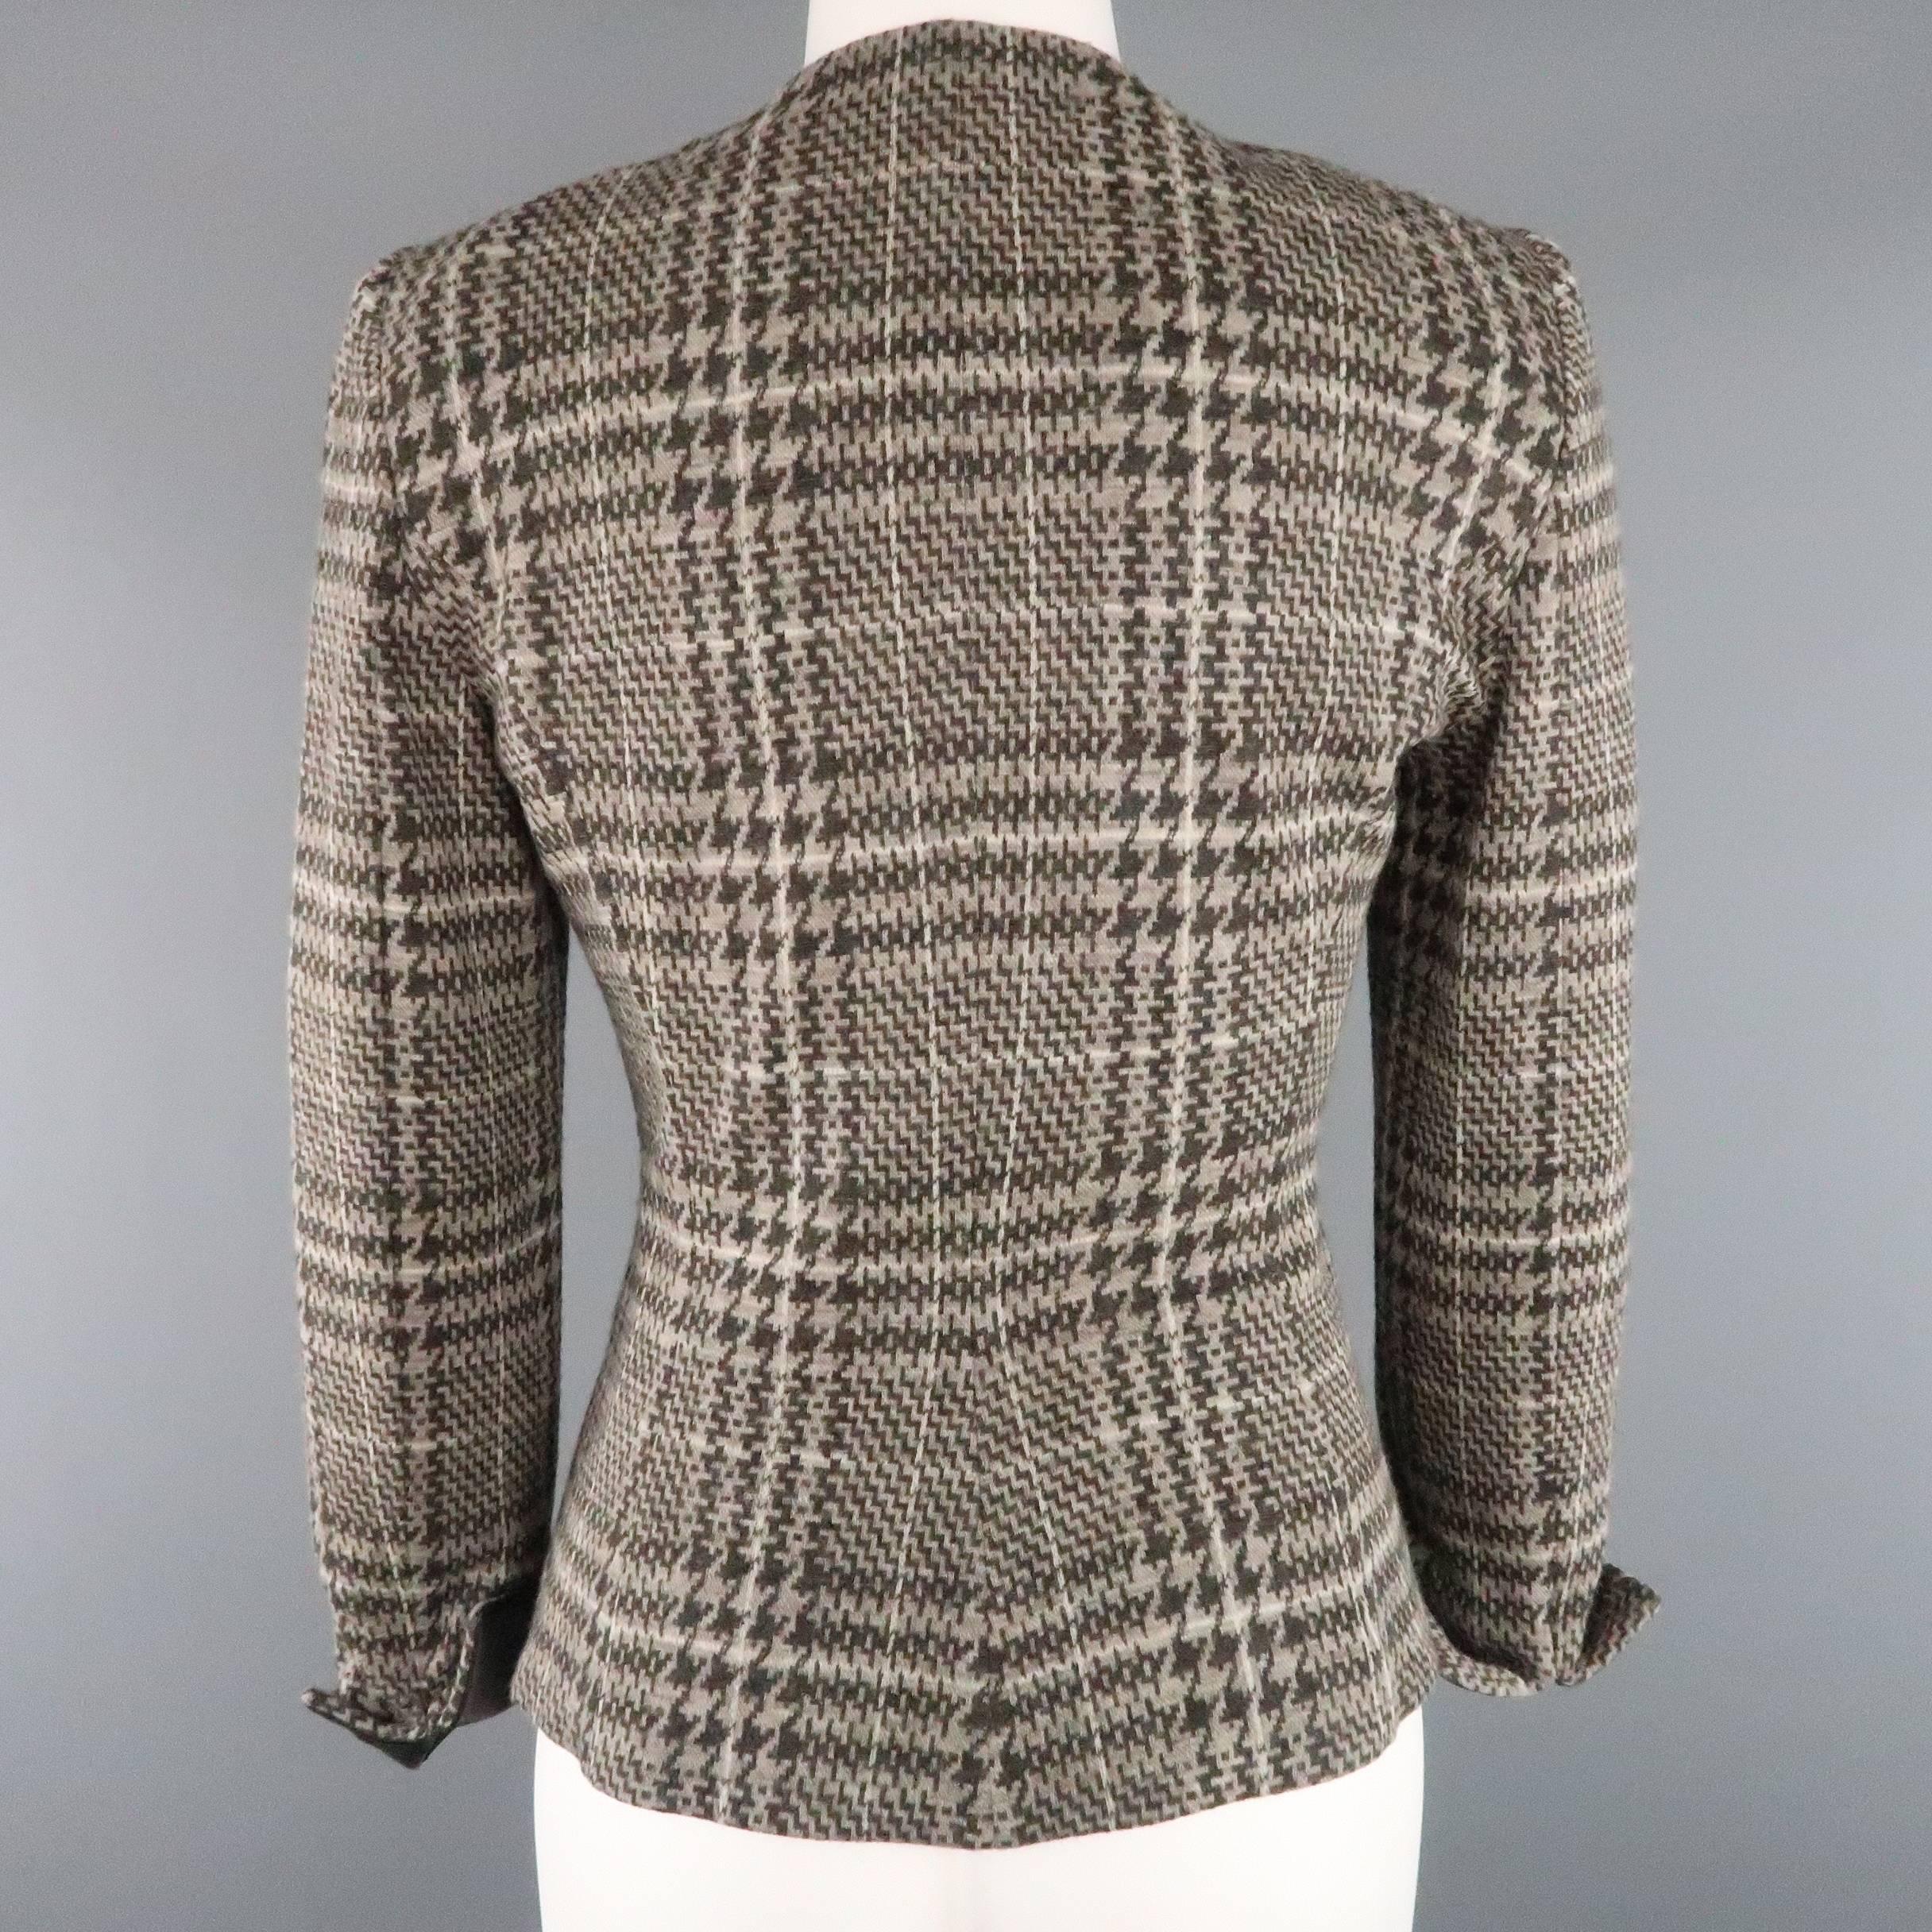 ARMANI COLLEZIONI Size 6 Taupe Houndstooth Wool Aligator Leather Collar Jacket 2